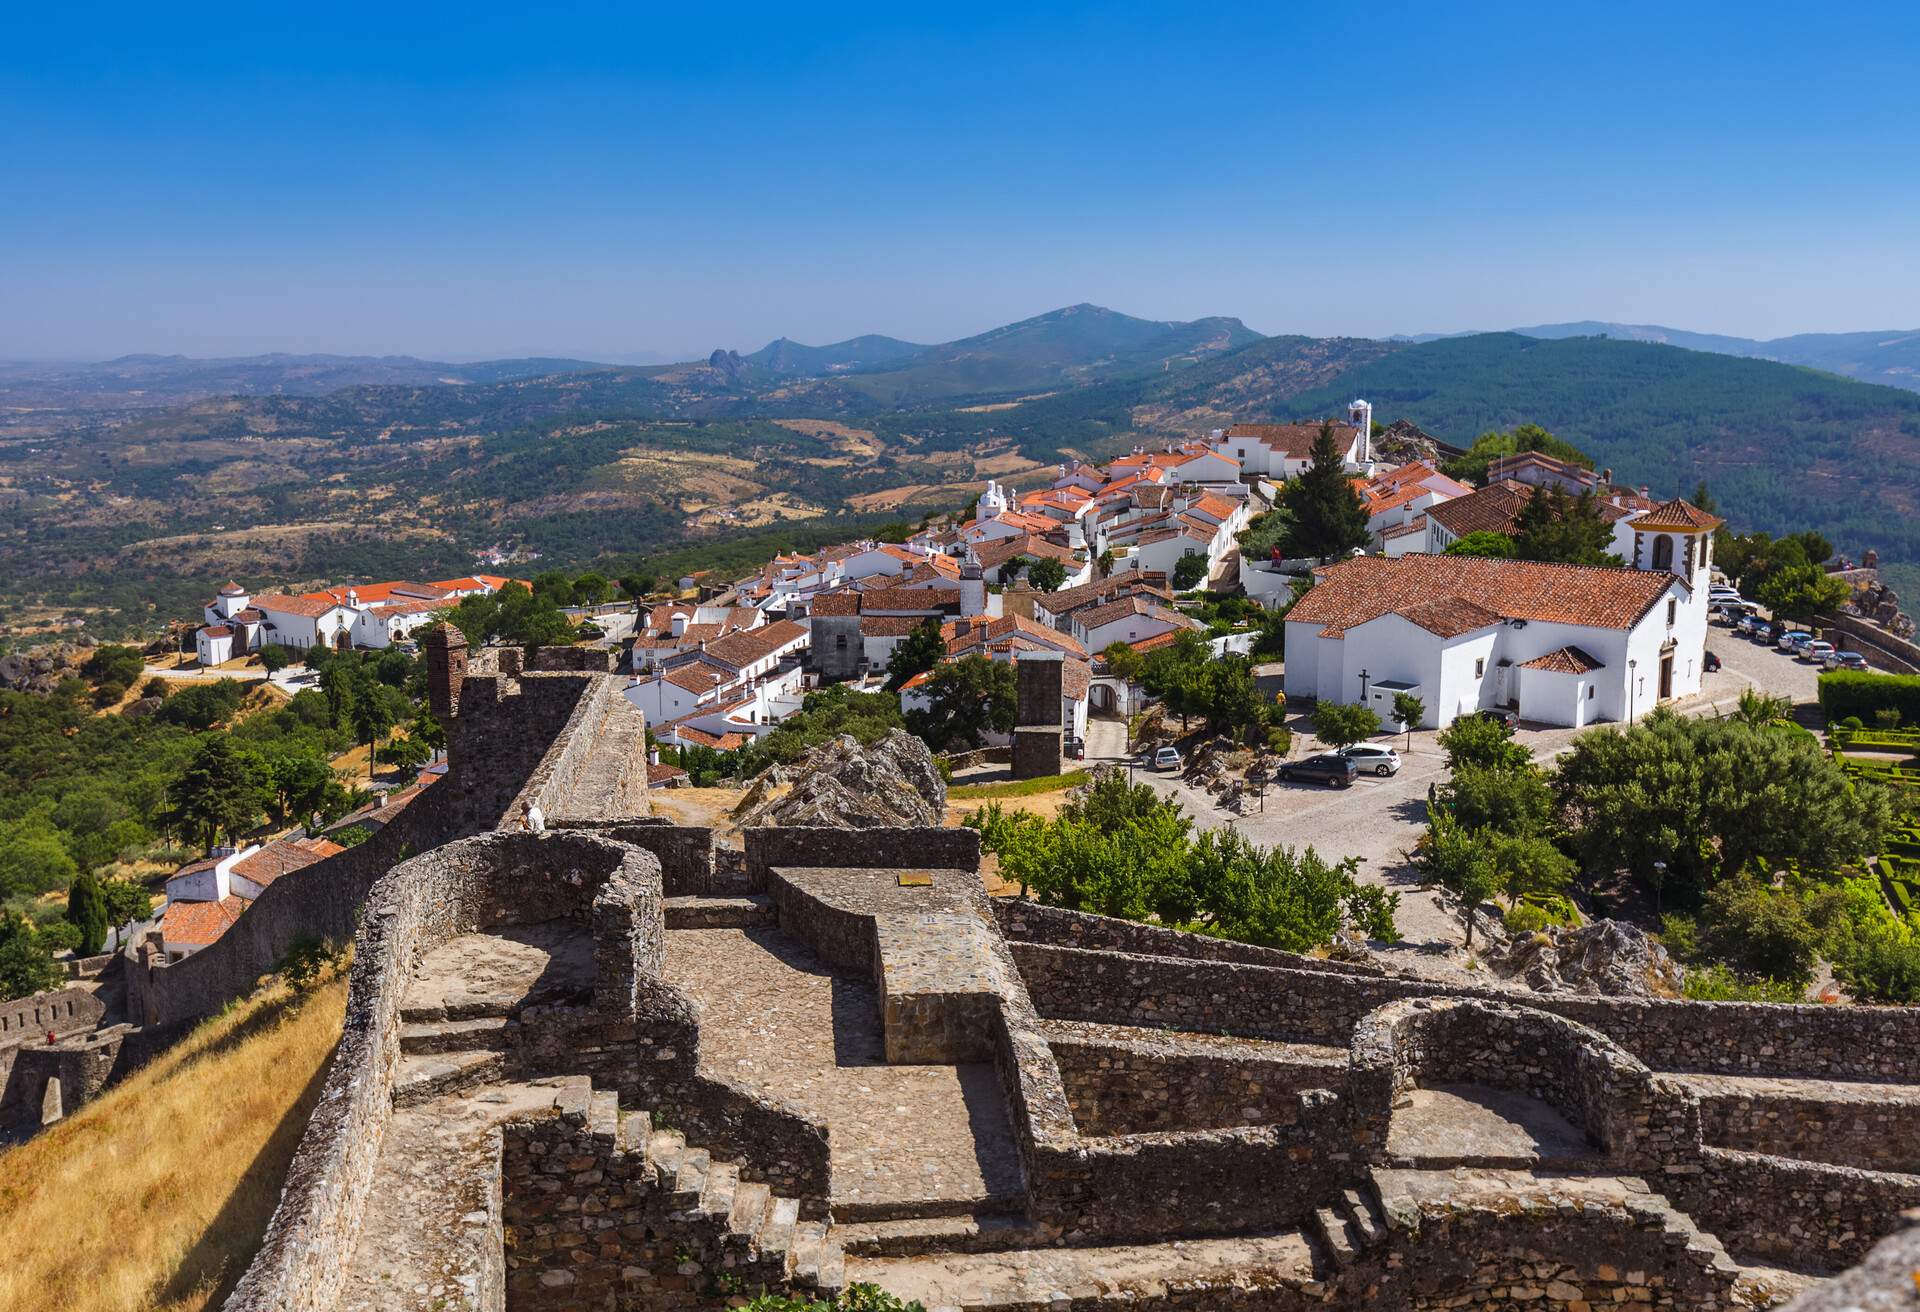 Fortress in village Marvao - Portugal - architecture background; Shutterstock ID 503221675